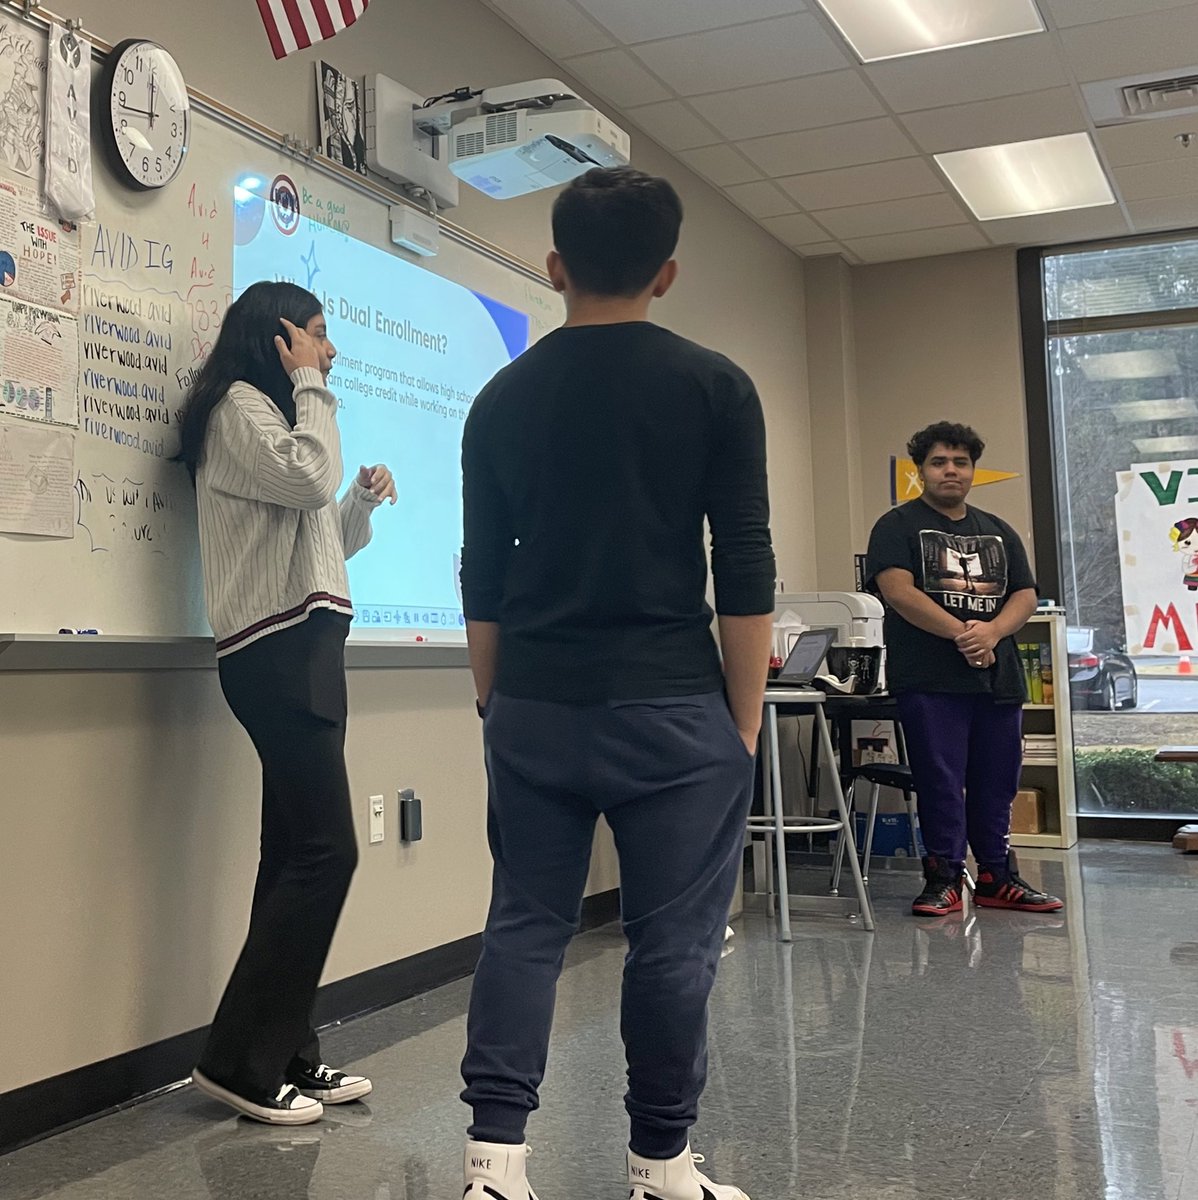 Course sign-up season is here! Our AVID students leveraged WICOR strategies to teach their classmates the ins & outs of academic programming options here @RiverwoodICS (IB, Honors, AP, and DE). They began the initial phase on Monday & today we caught the experts in action.